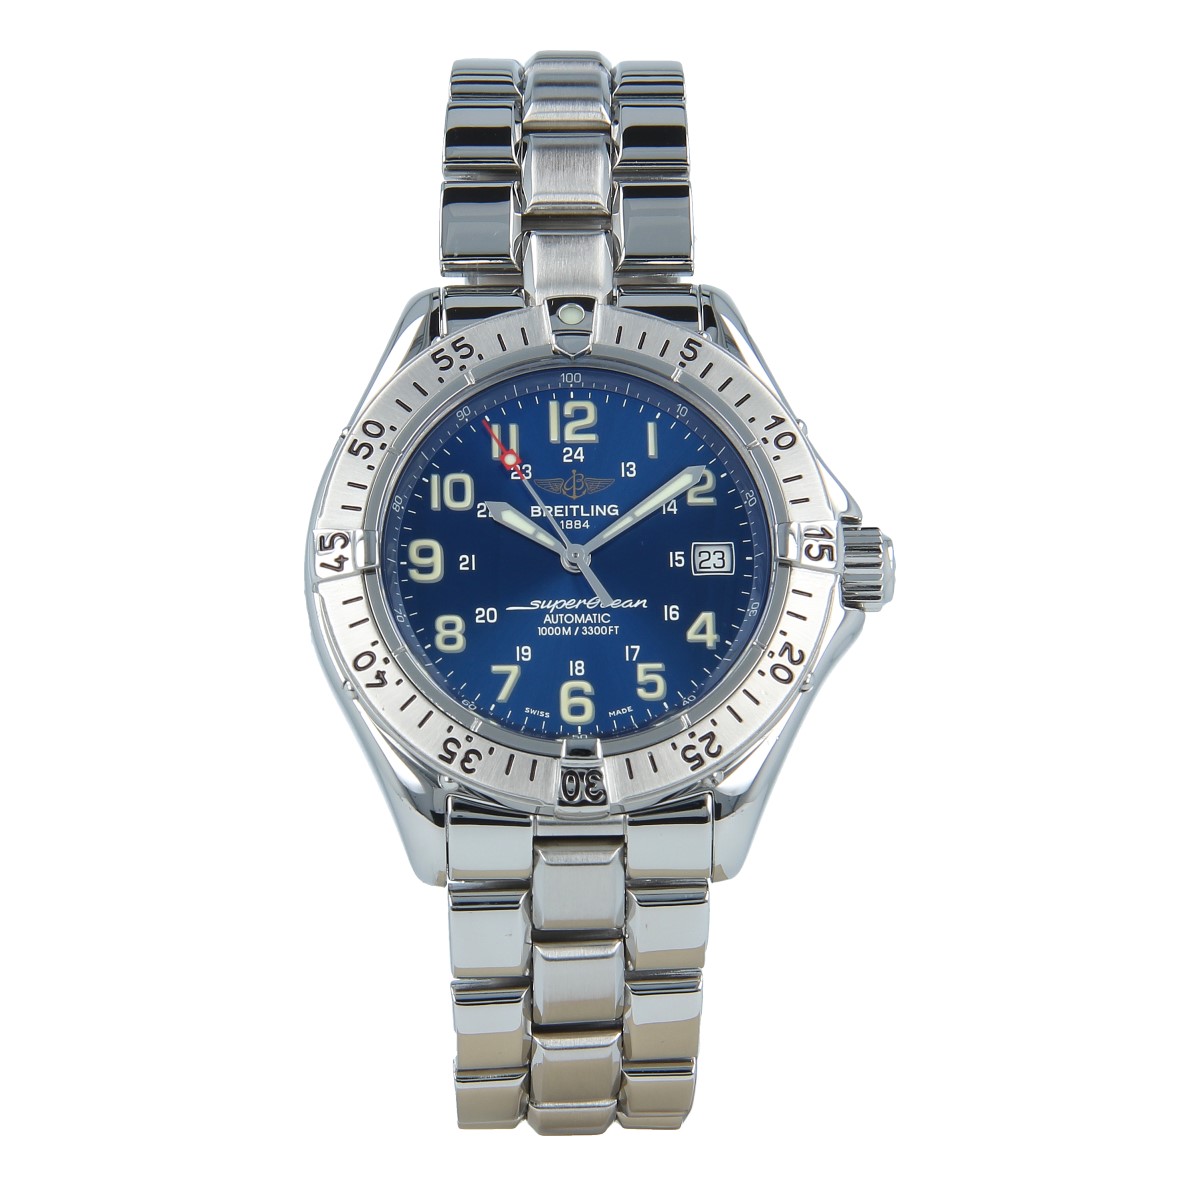 Breitling Superocean A17340 | Buy pre-owned Breitling watches